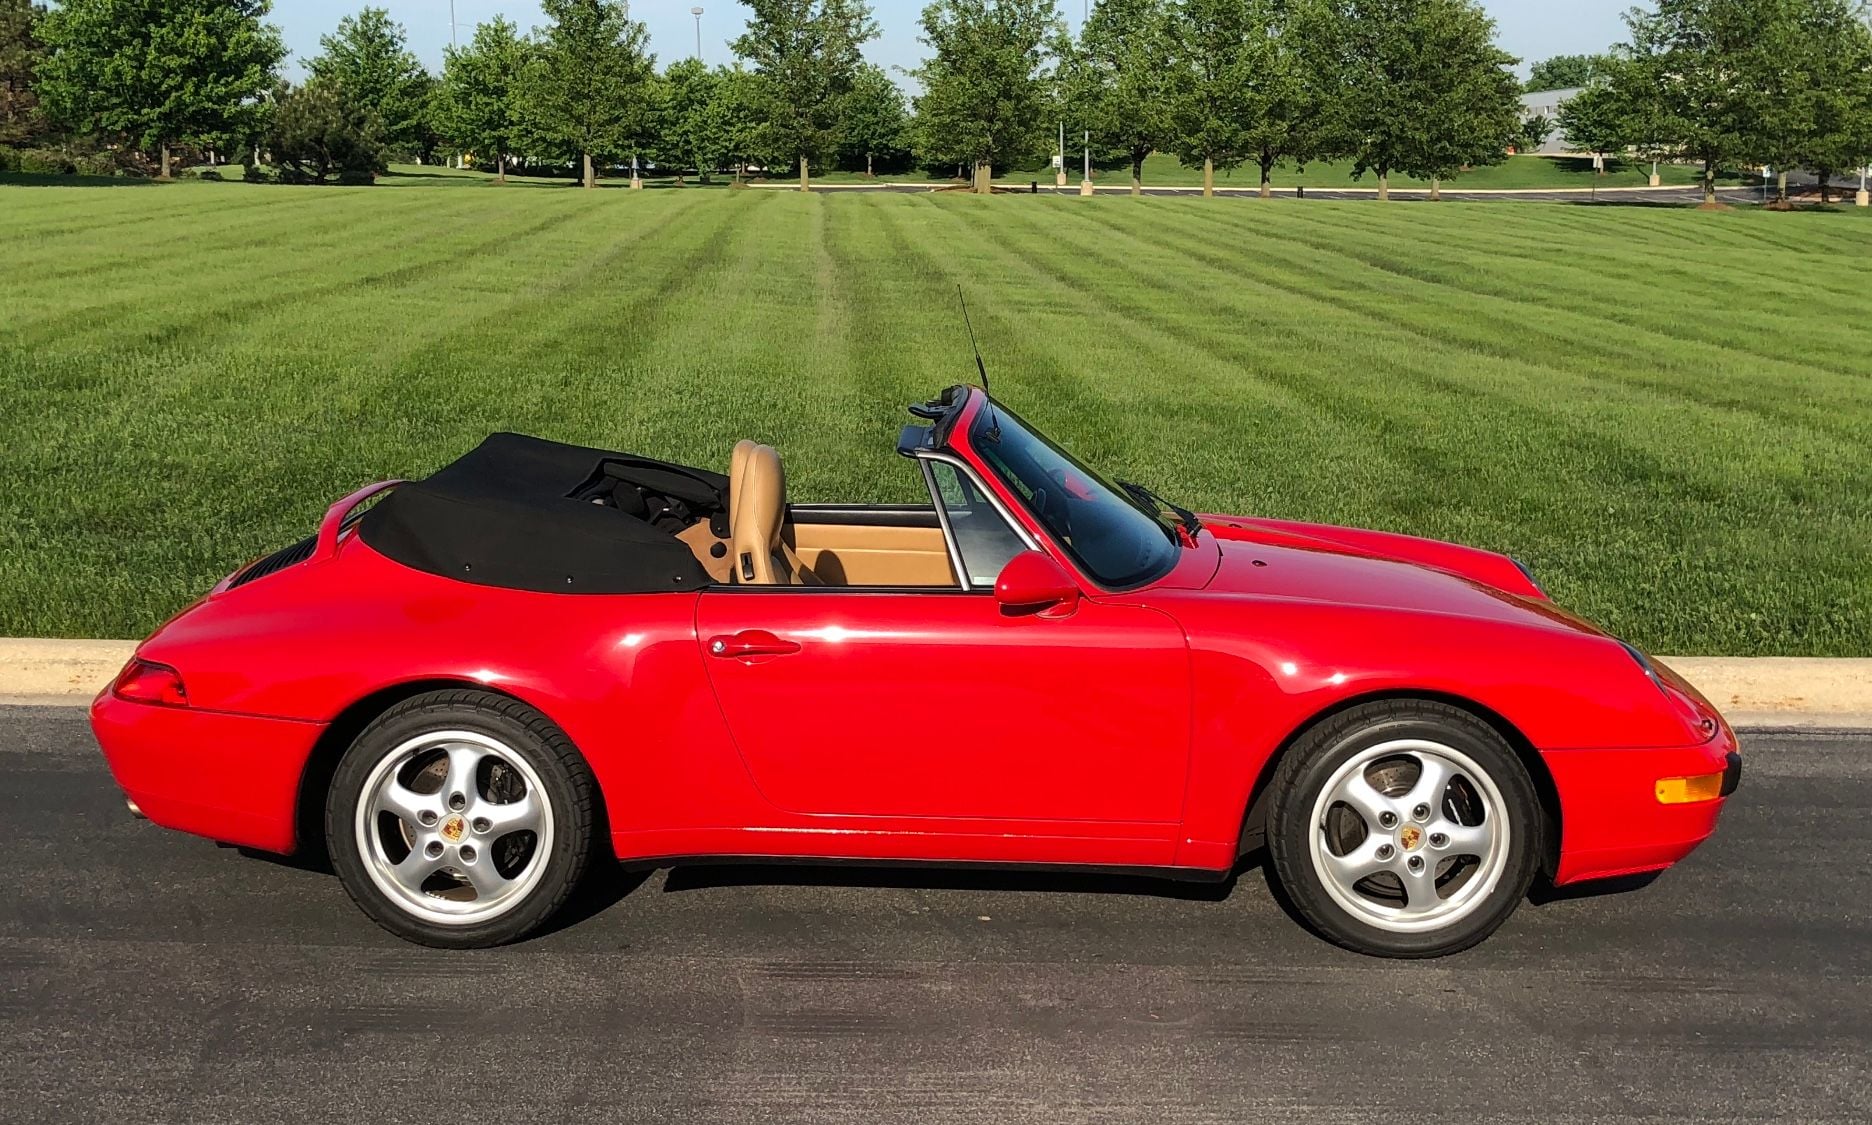 1995 Porsche 911 - 1995 Porsche 911 Carrera Cab 6spd 28k Miles! - Used - VIN WP0CB29985S340950 - 27,892 Miles - 6 cyl - 2WD - Manual - Convertible - Red - Bloomingdale, IL 60108, United States